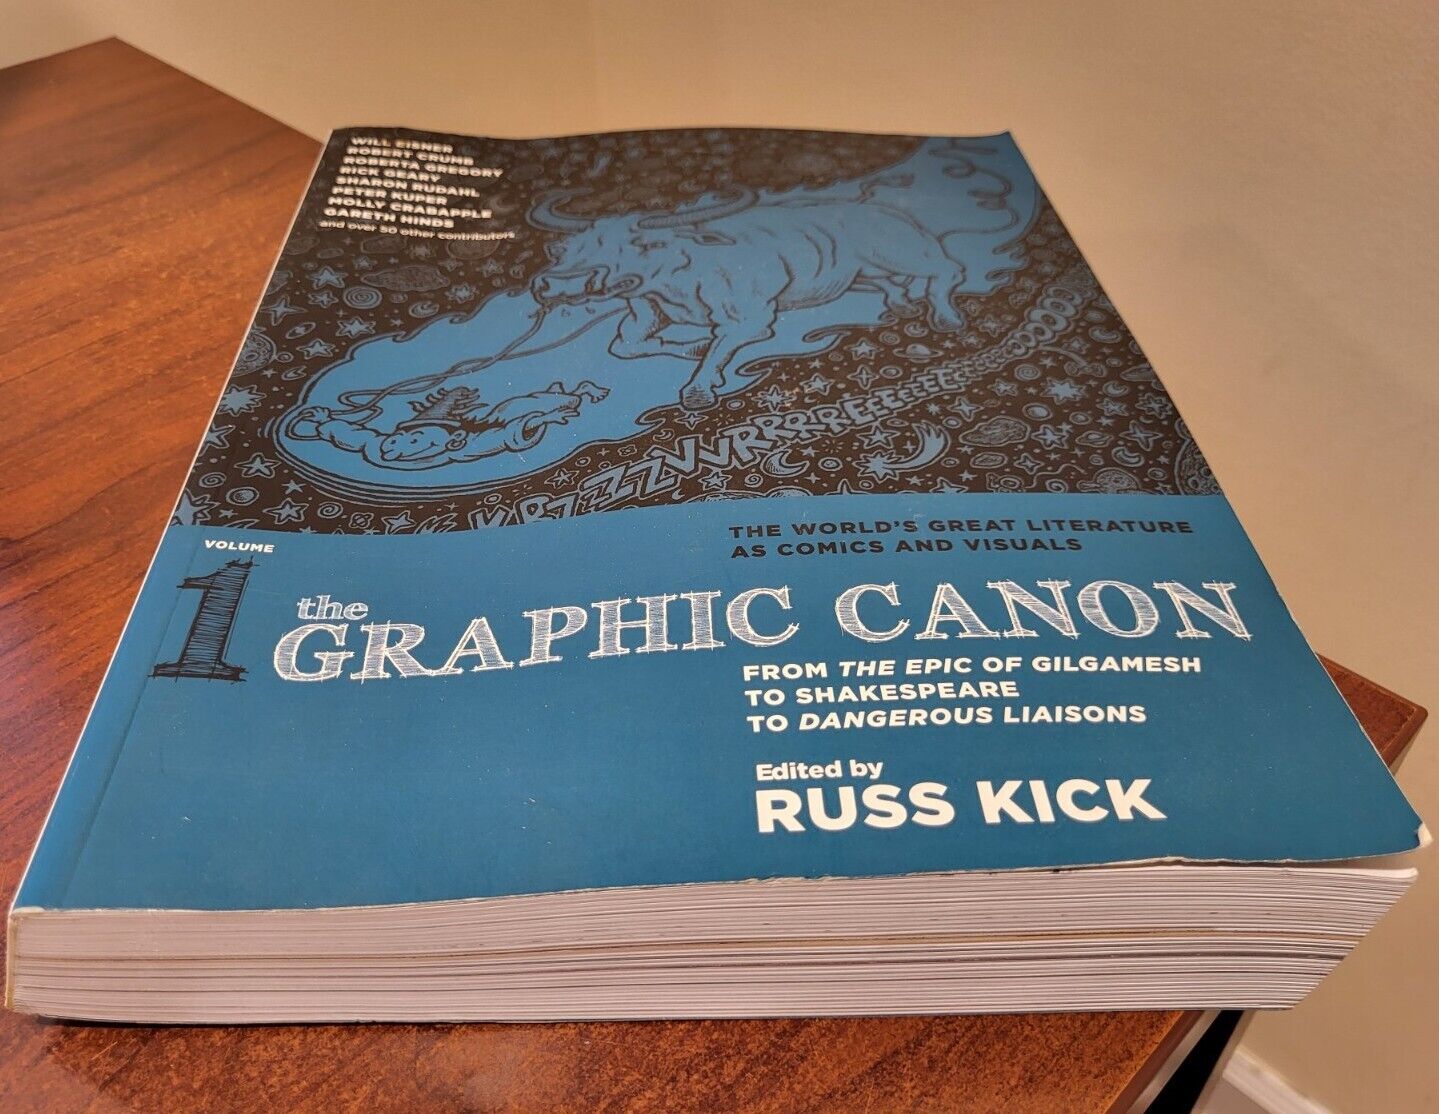 THE GRAPHIC CANON  VOLUME 1   Edited Russ Kick  2012  SOFTCOVER  First Edition